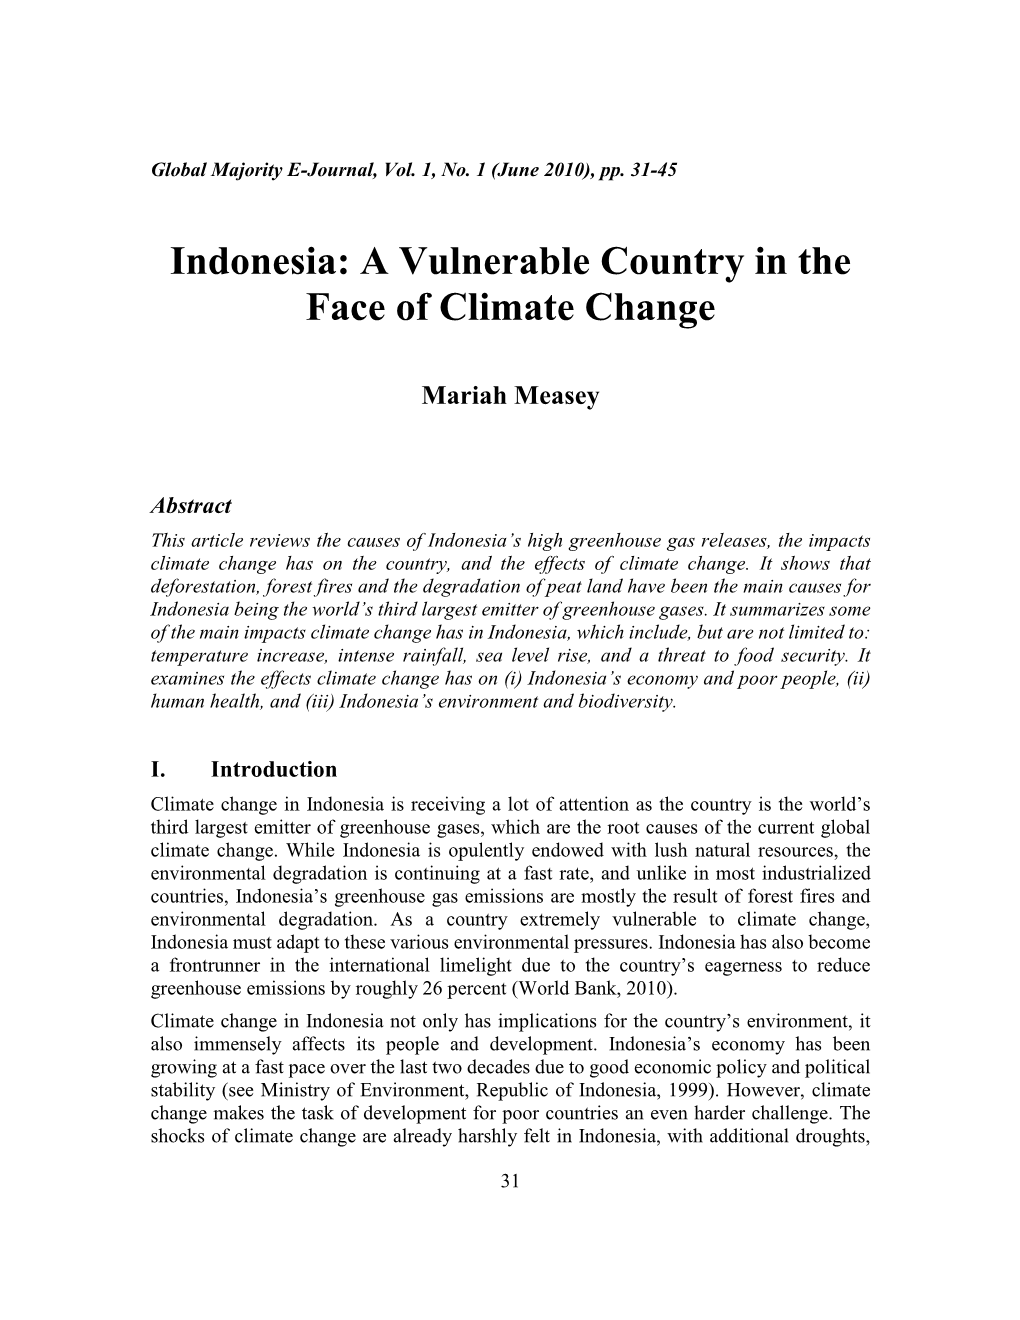 Indonesia: a Vulnerable Country in the Face of Climate Change